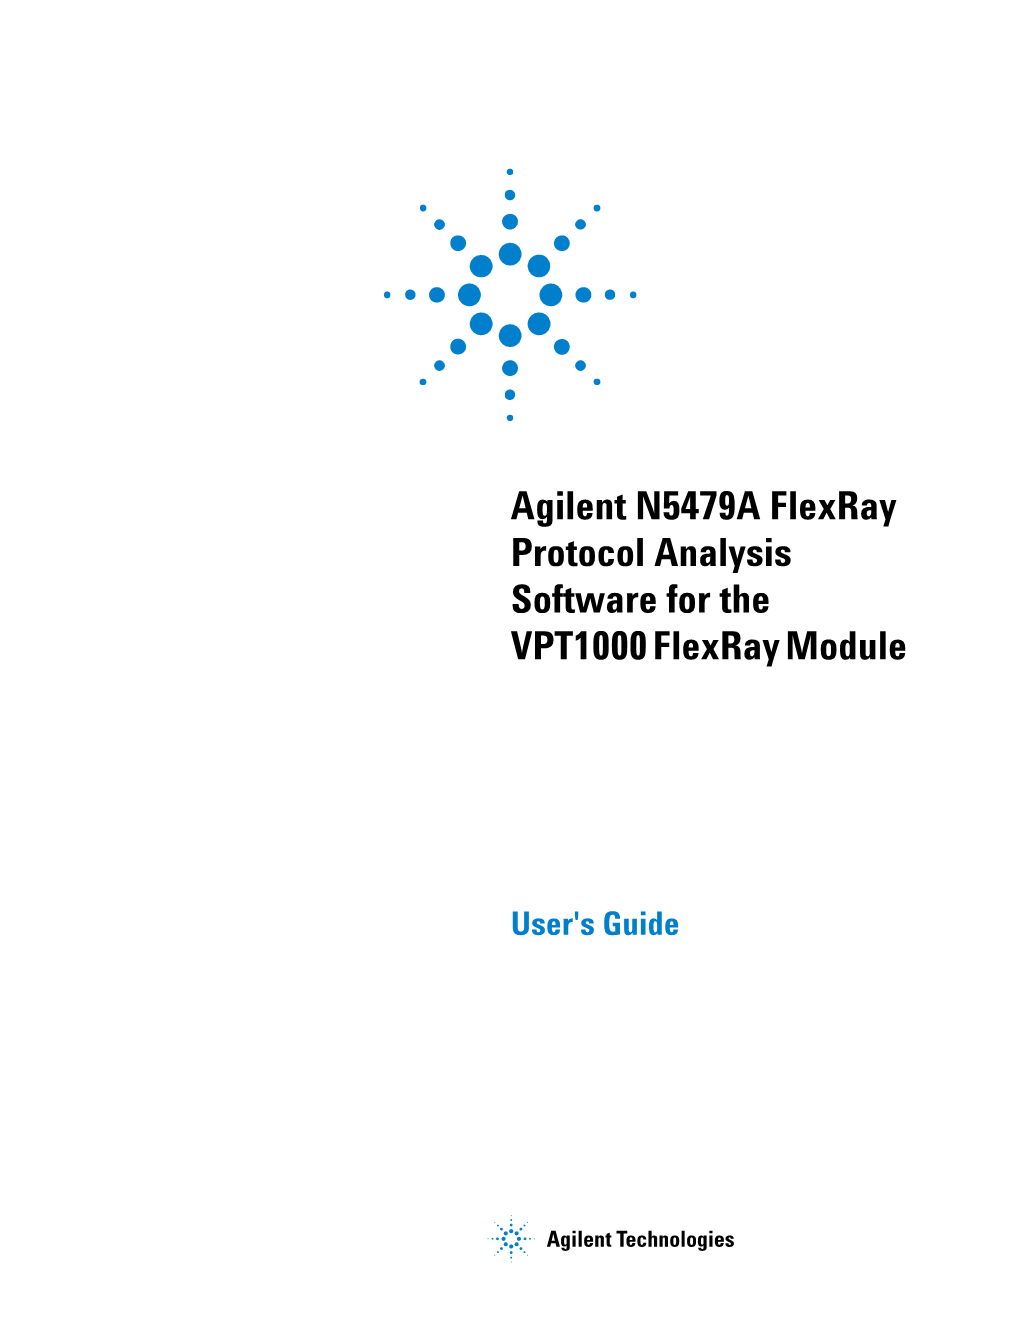 Agilent N5479A Flexray Protocol Analysis Software for the VPT1000 Flexray Module